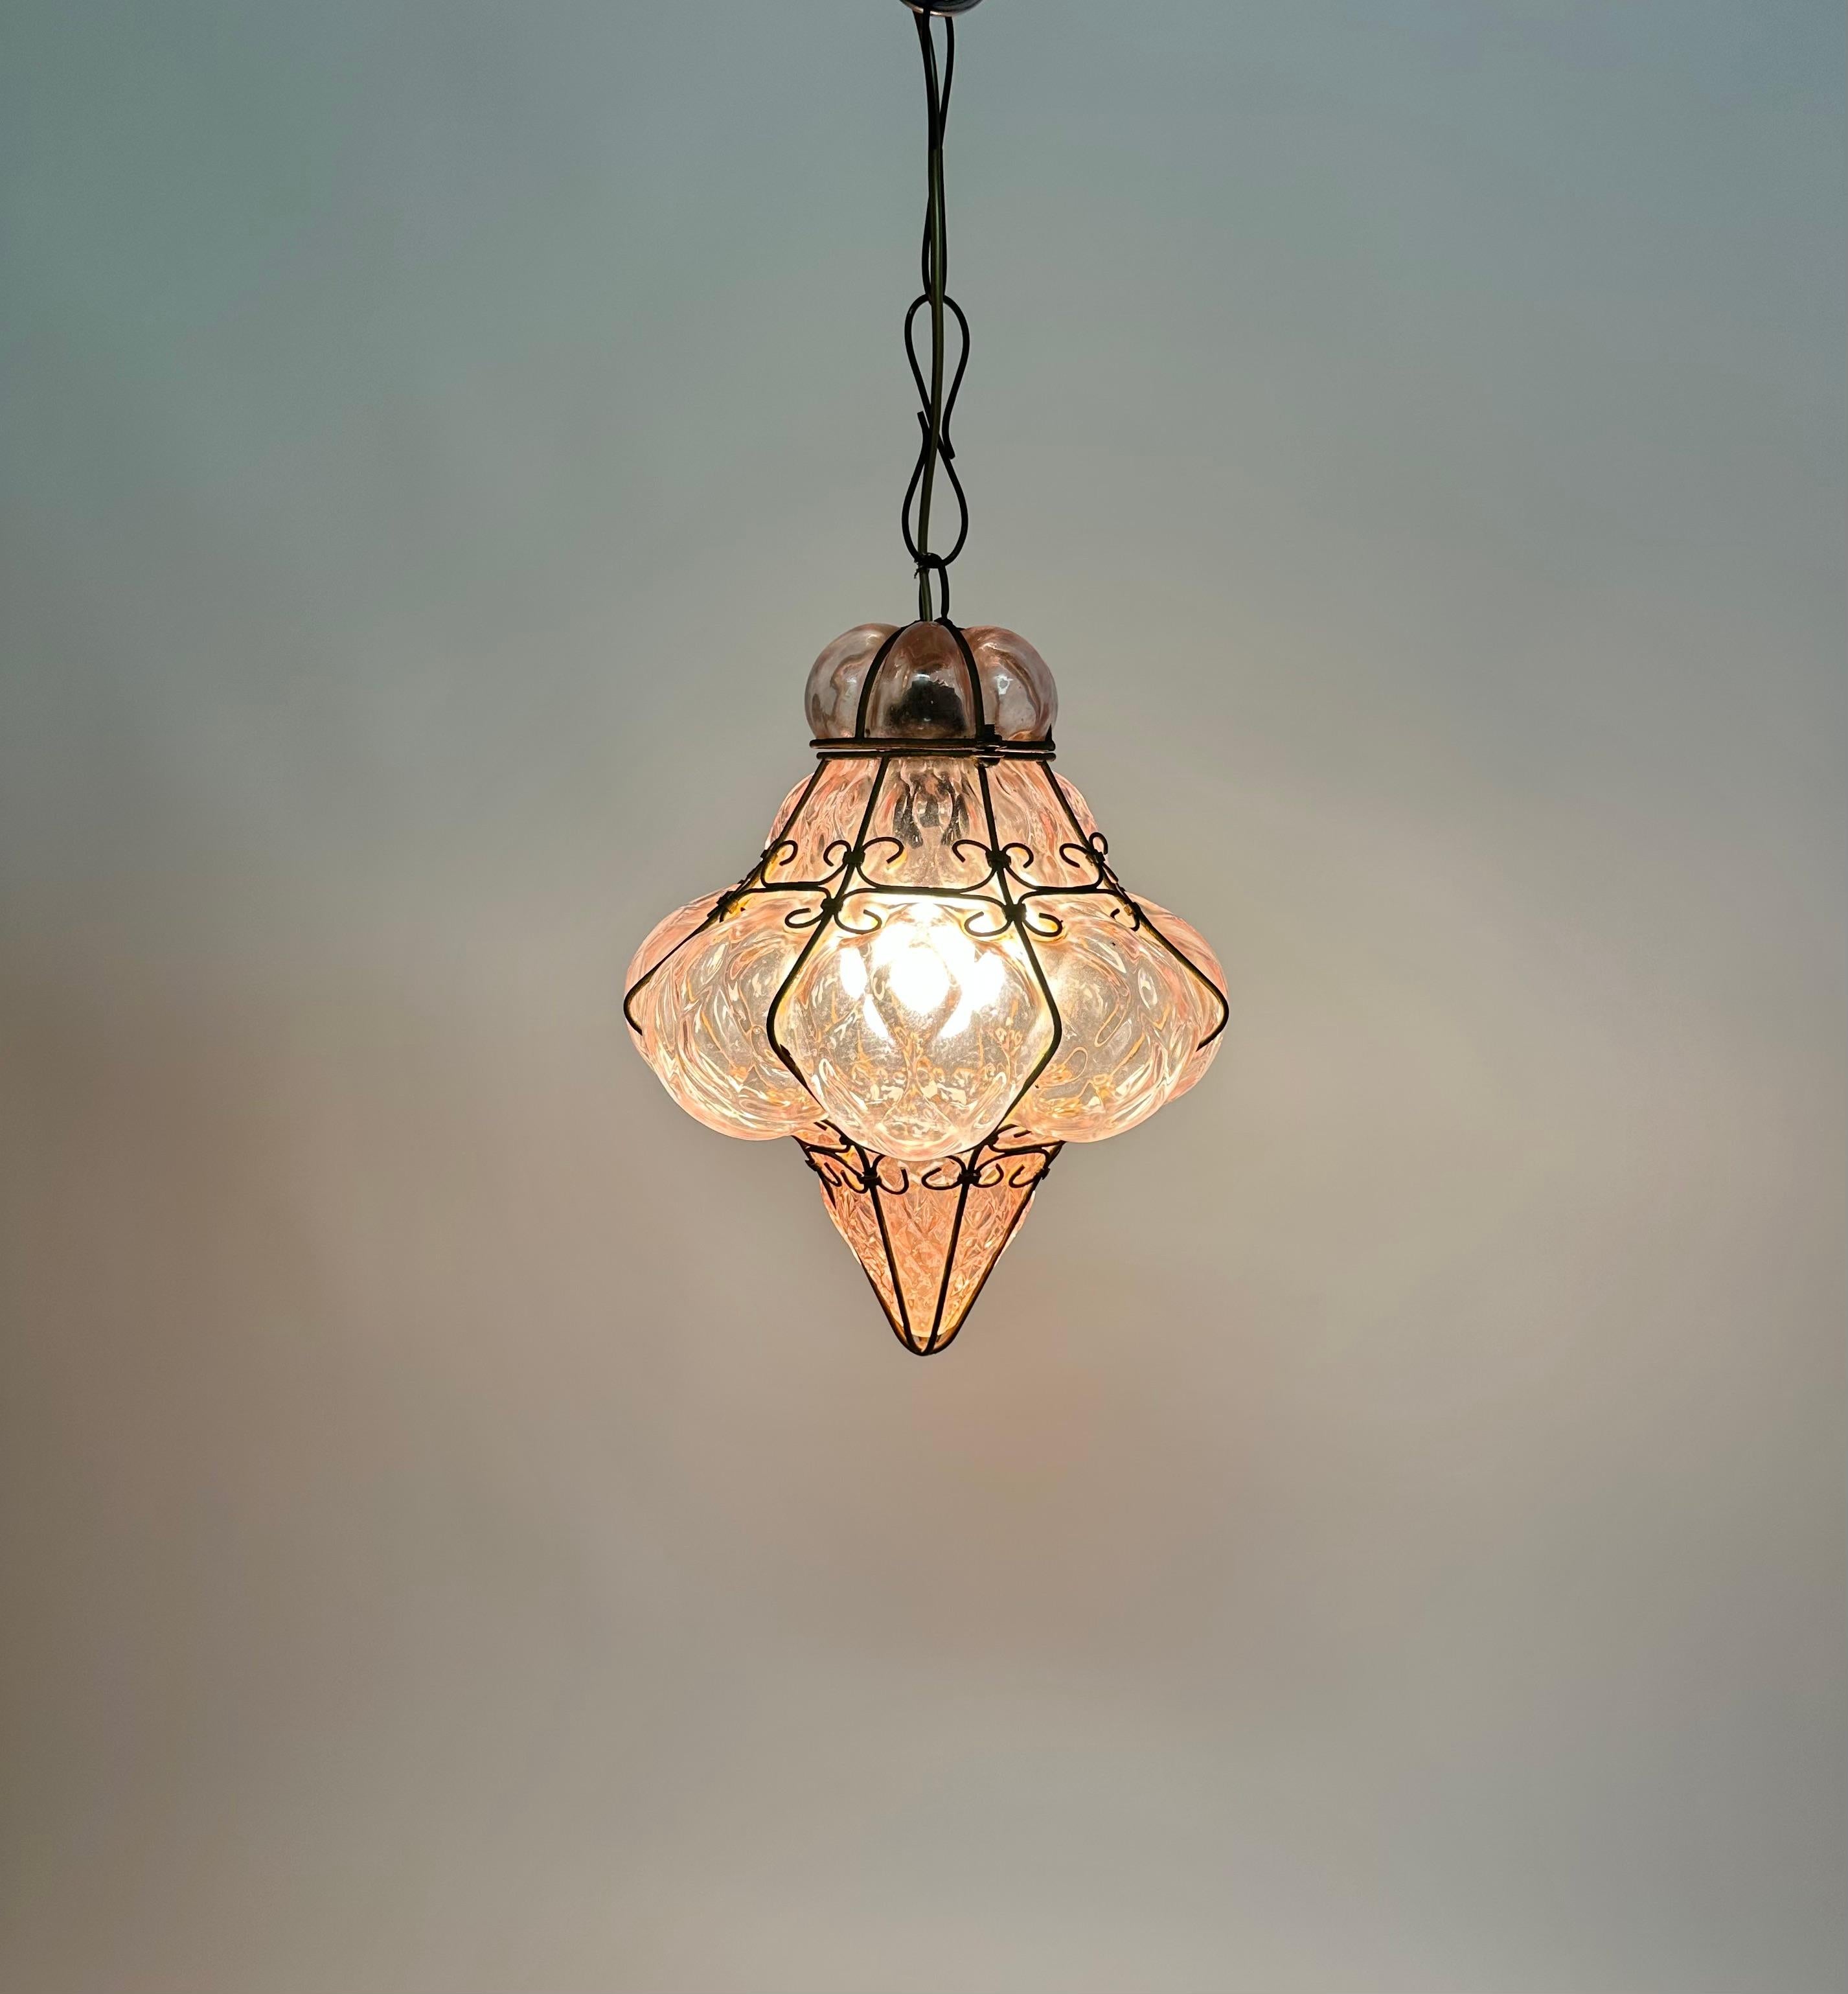 Midcentury Handblown Murano Pink Glass Pendant Light by Seguso, Italy, 1940s For Sale 1